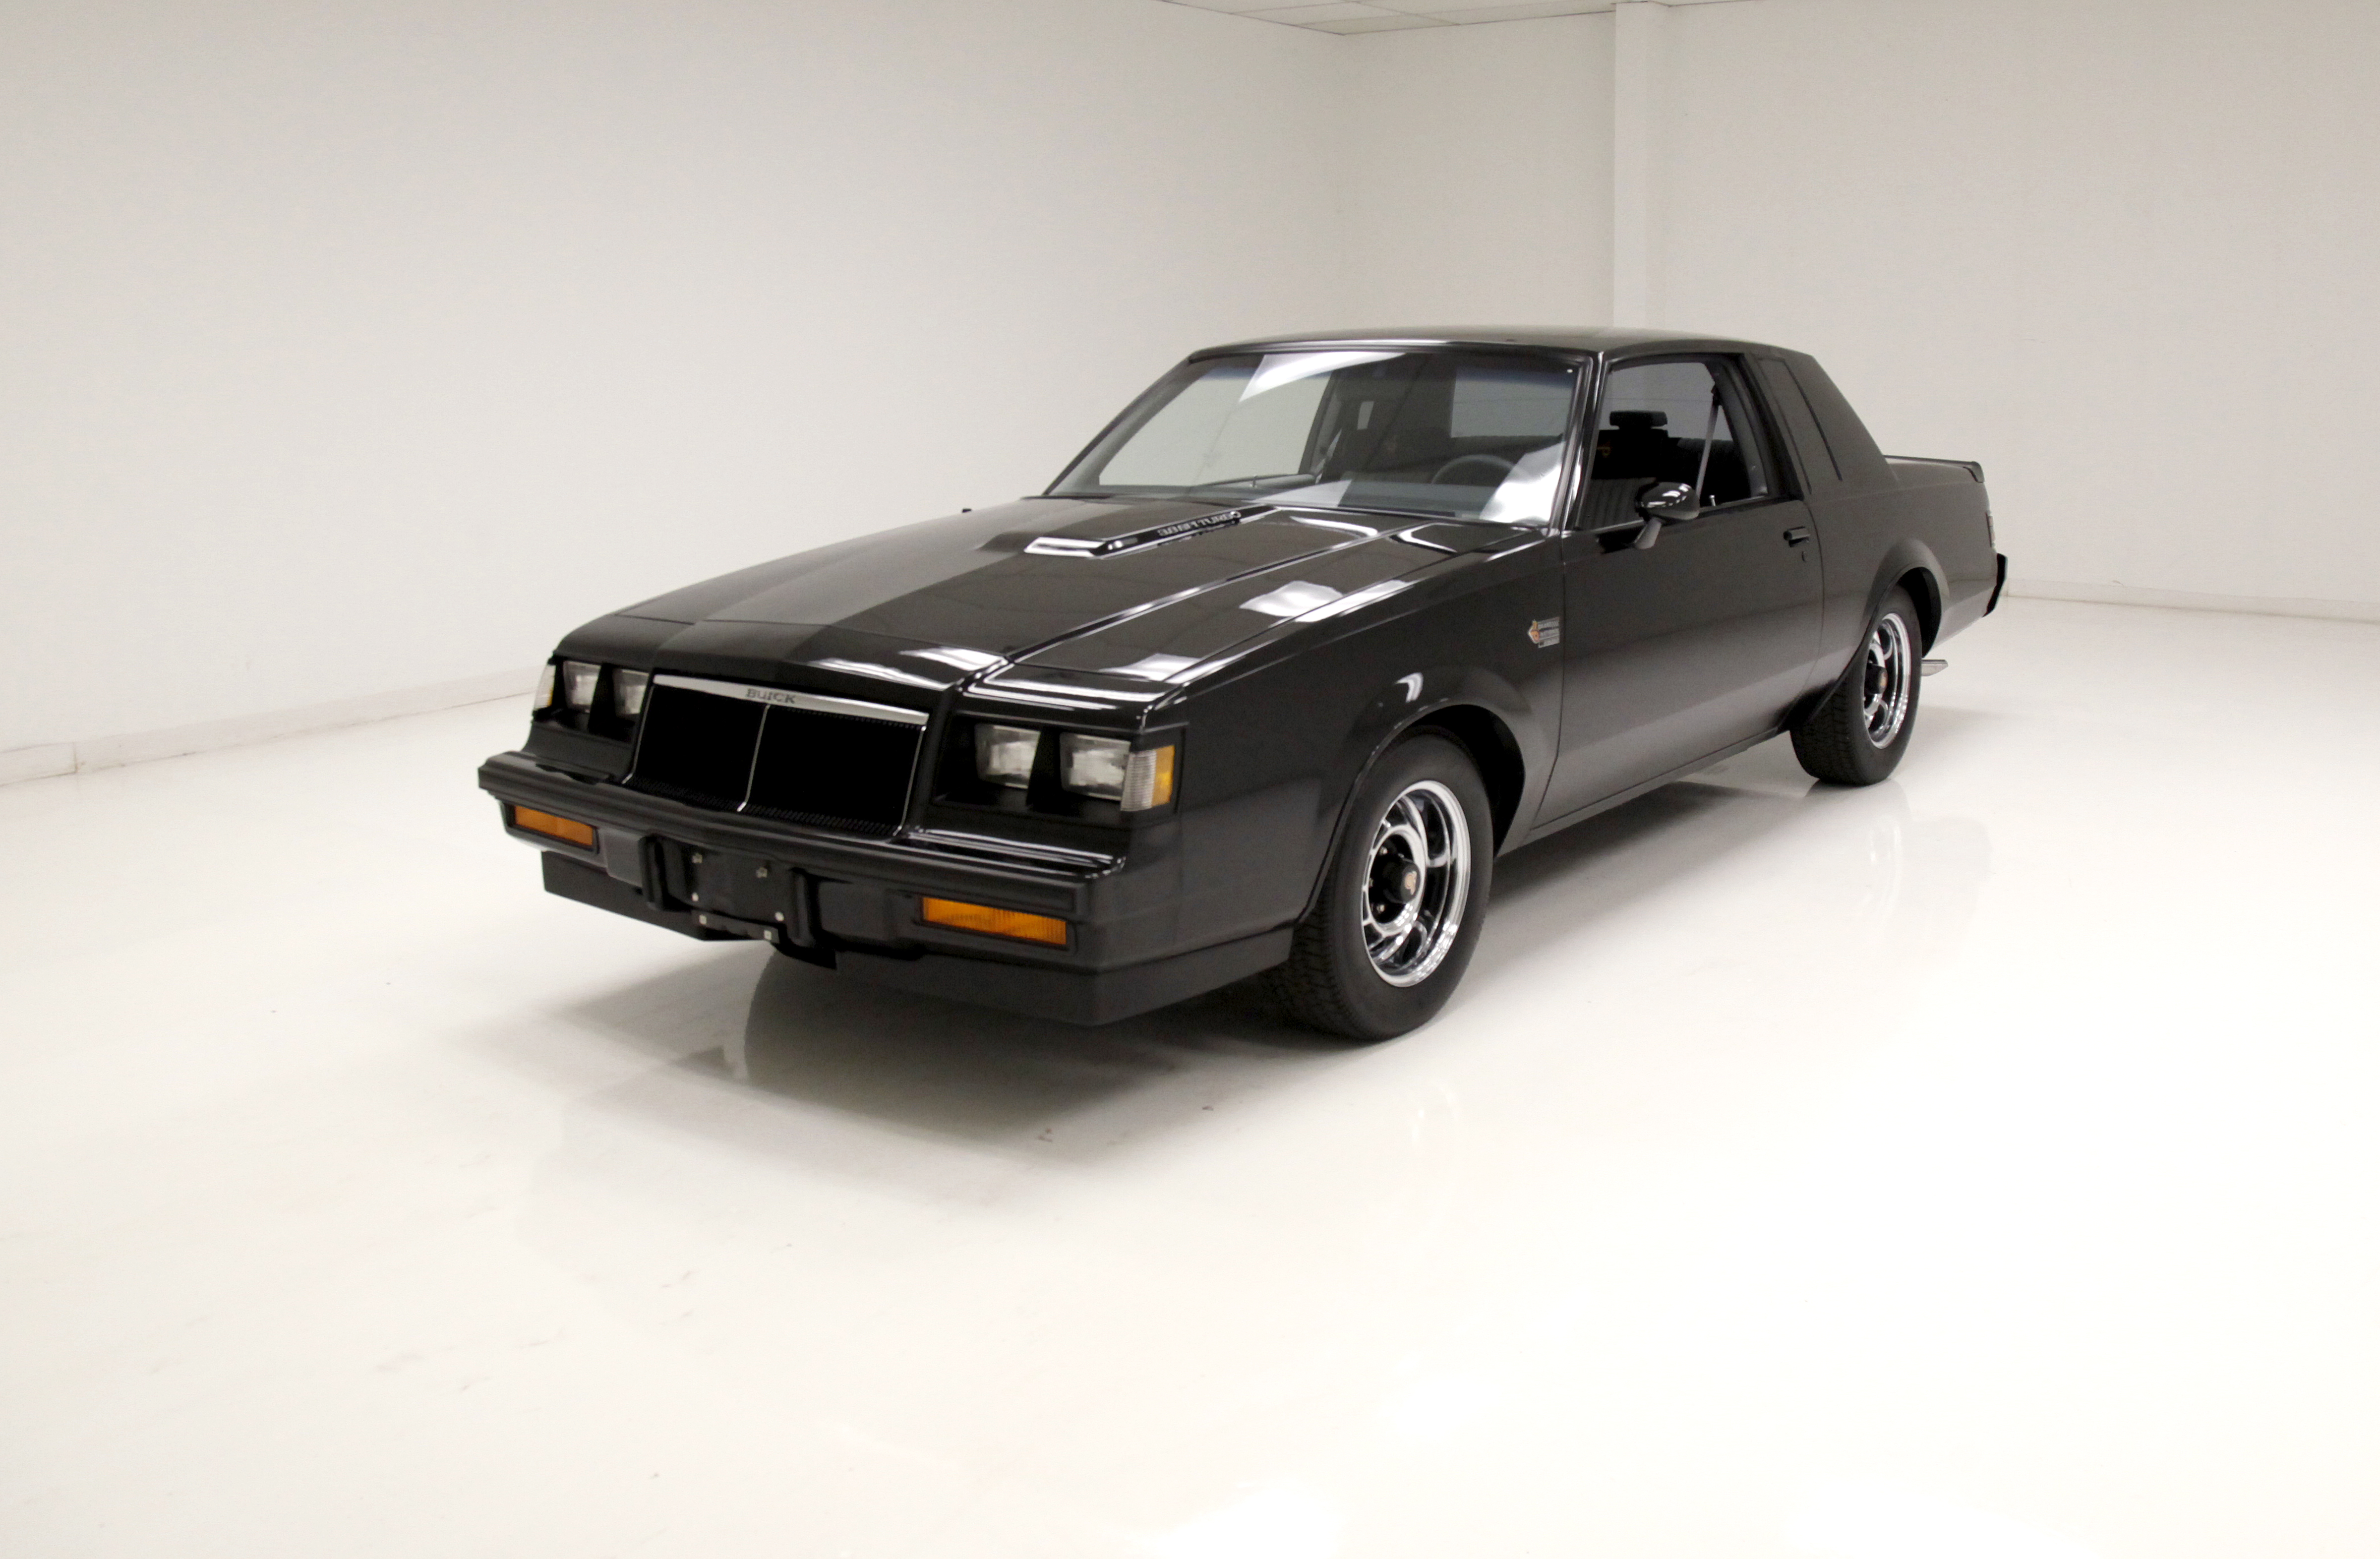 1987 Buick Regal T-Type Turbo | Hagerty Valuation Tools